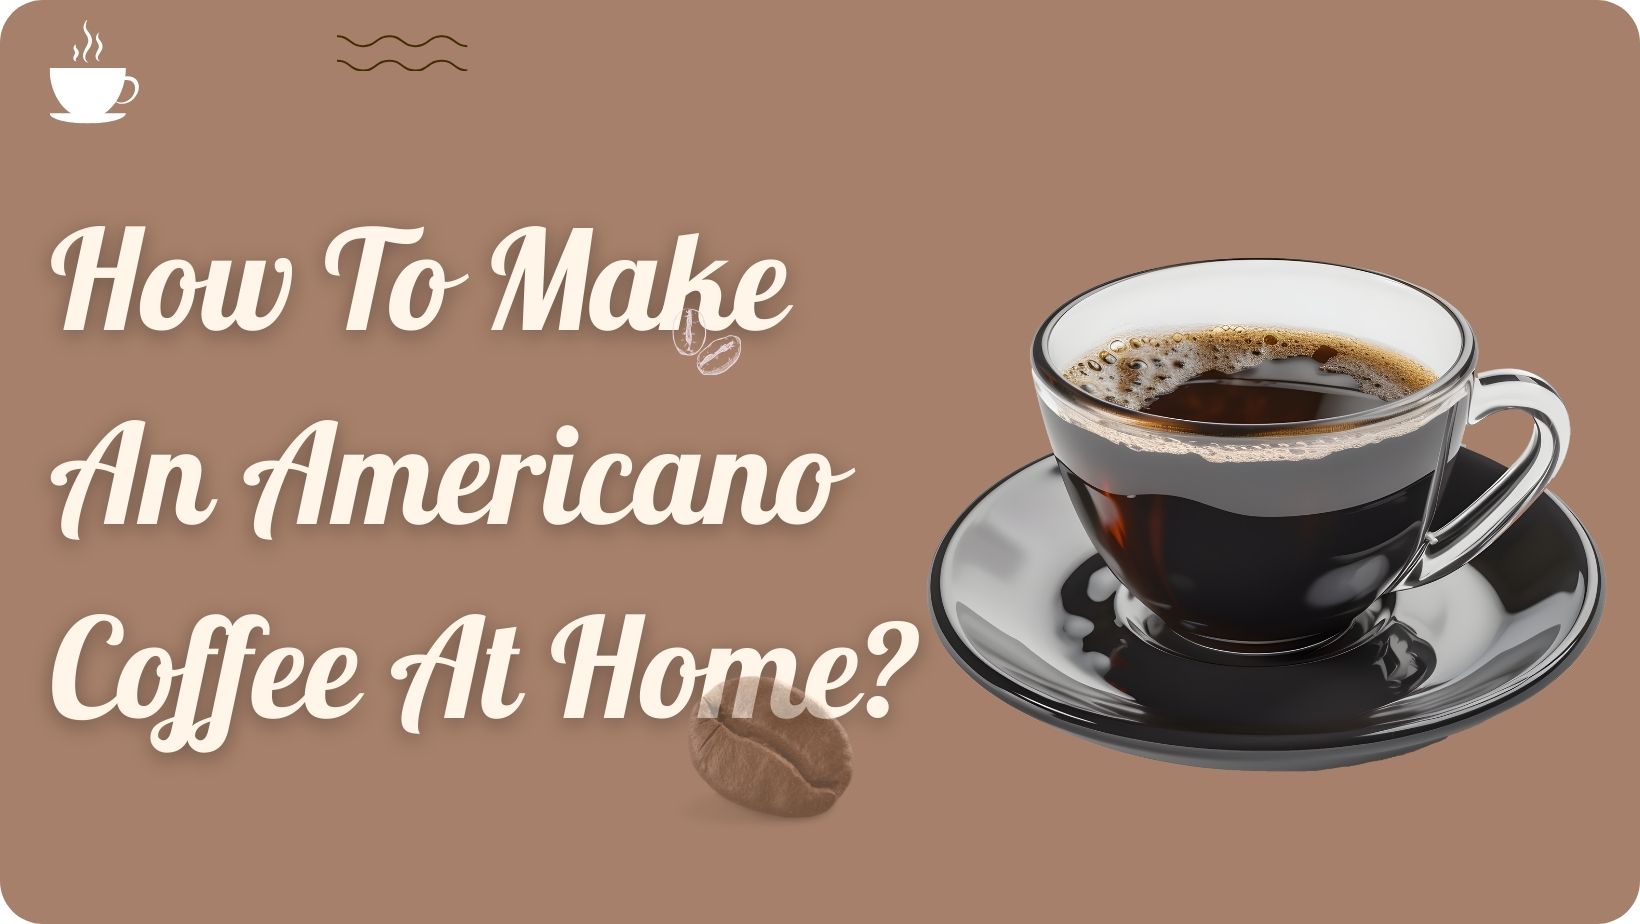 How To Make An Americano Coffee At Home?